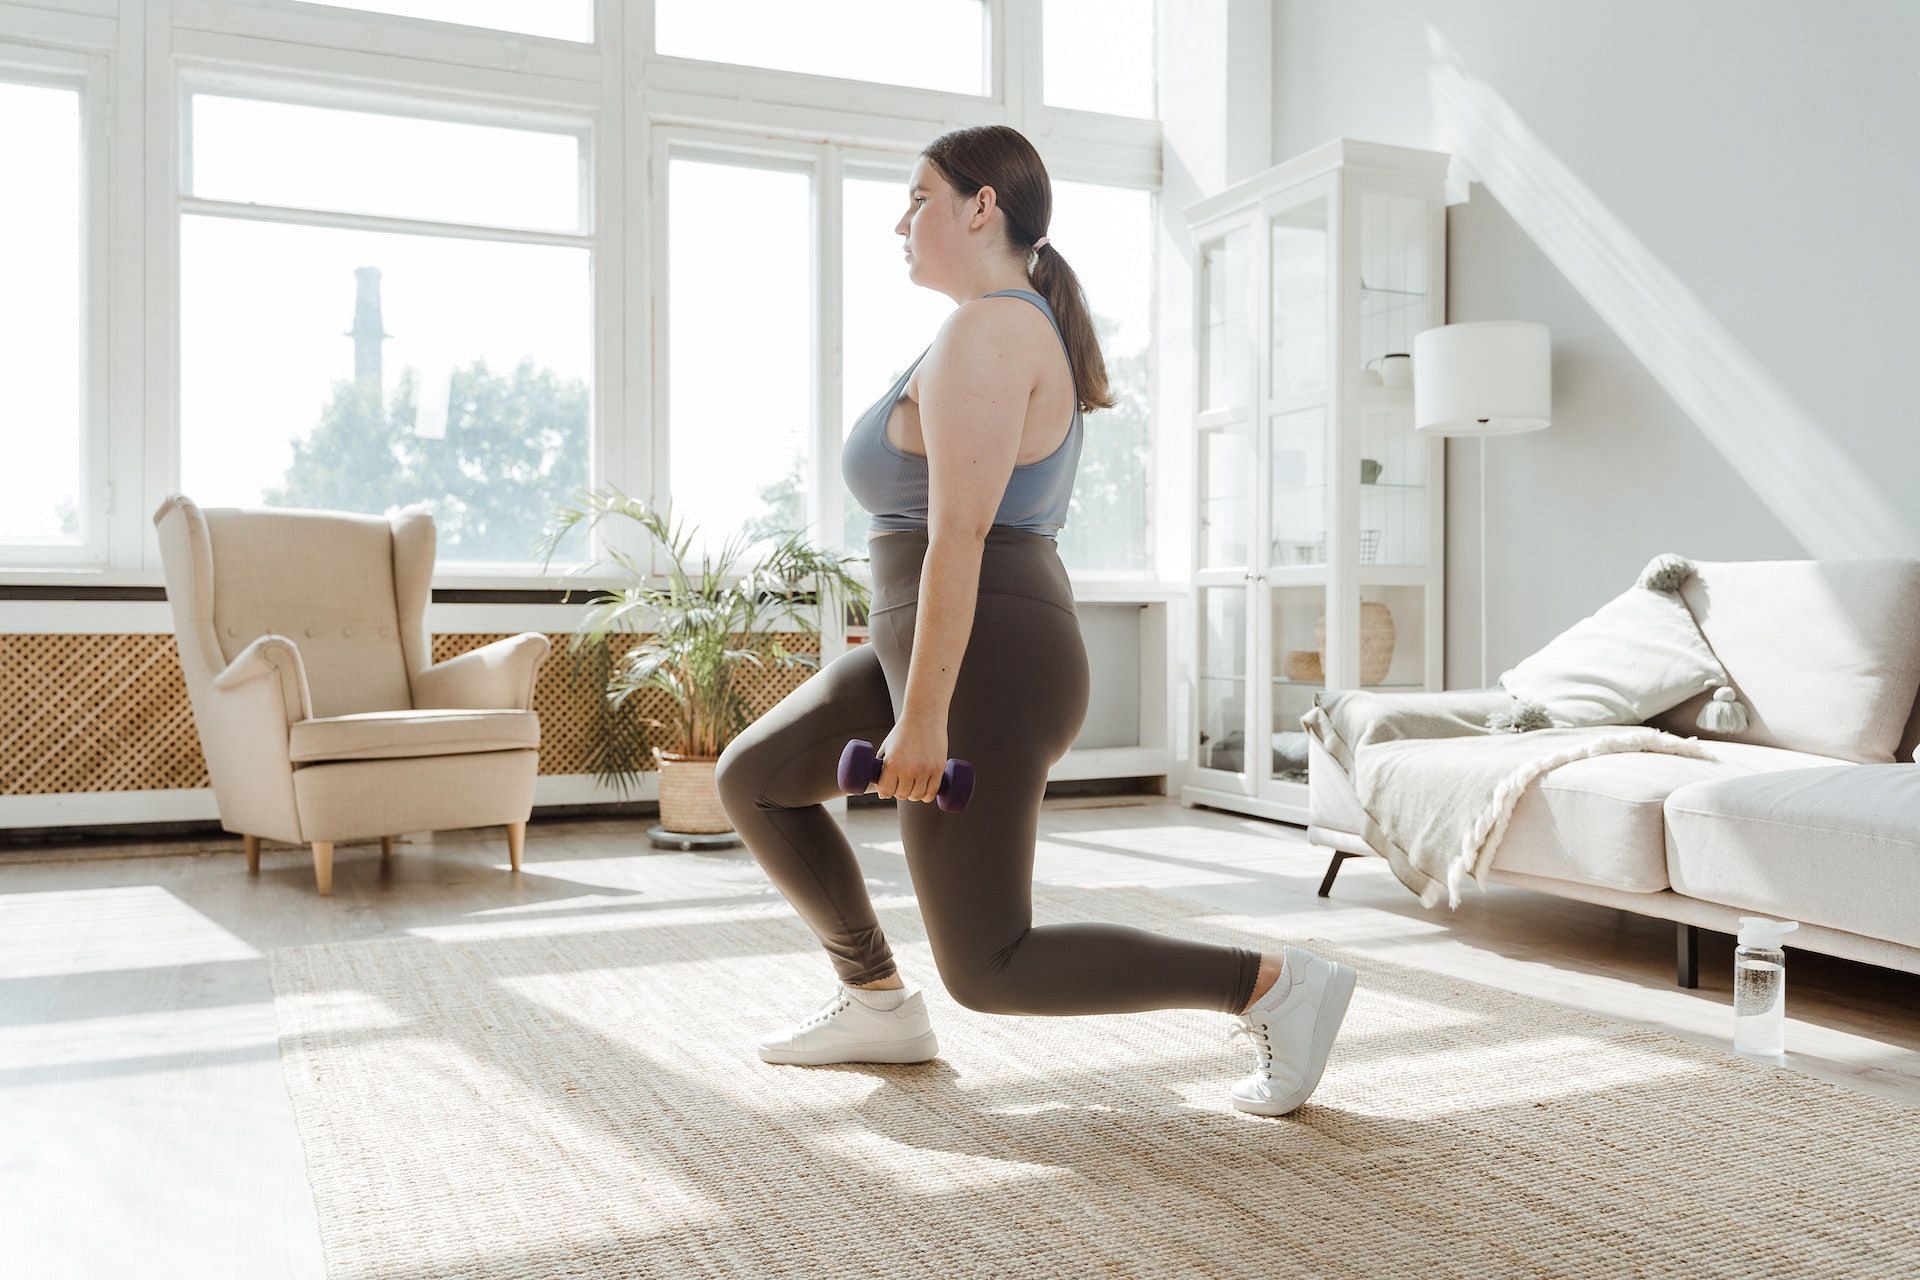 There are several weight loss exercises you can do indoors. (Photo via Pexels/MART PRODUCTION)